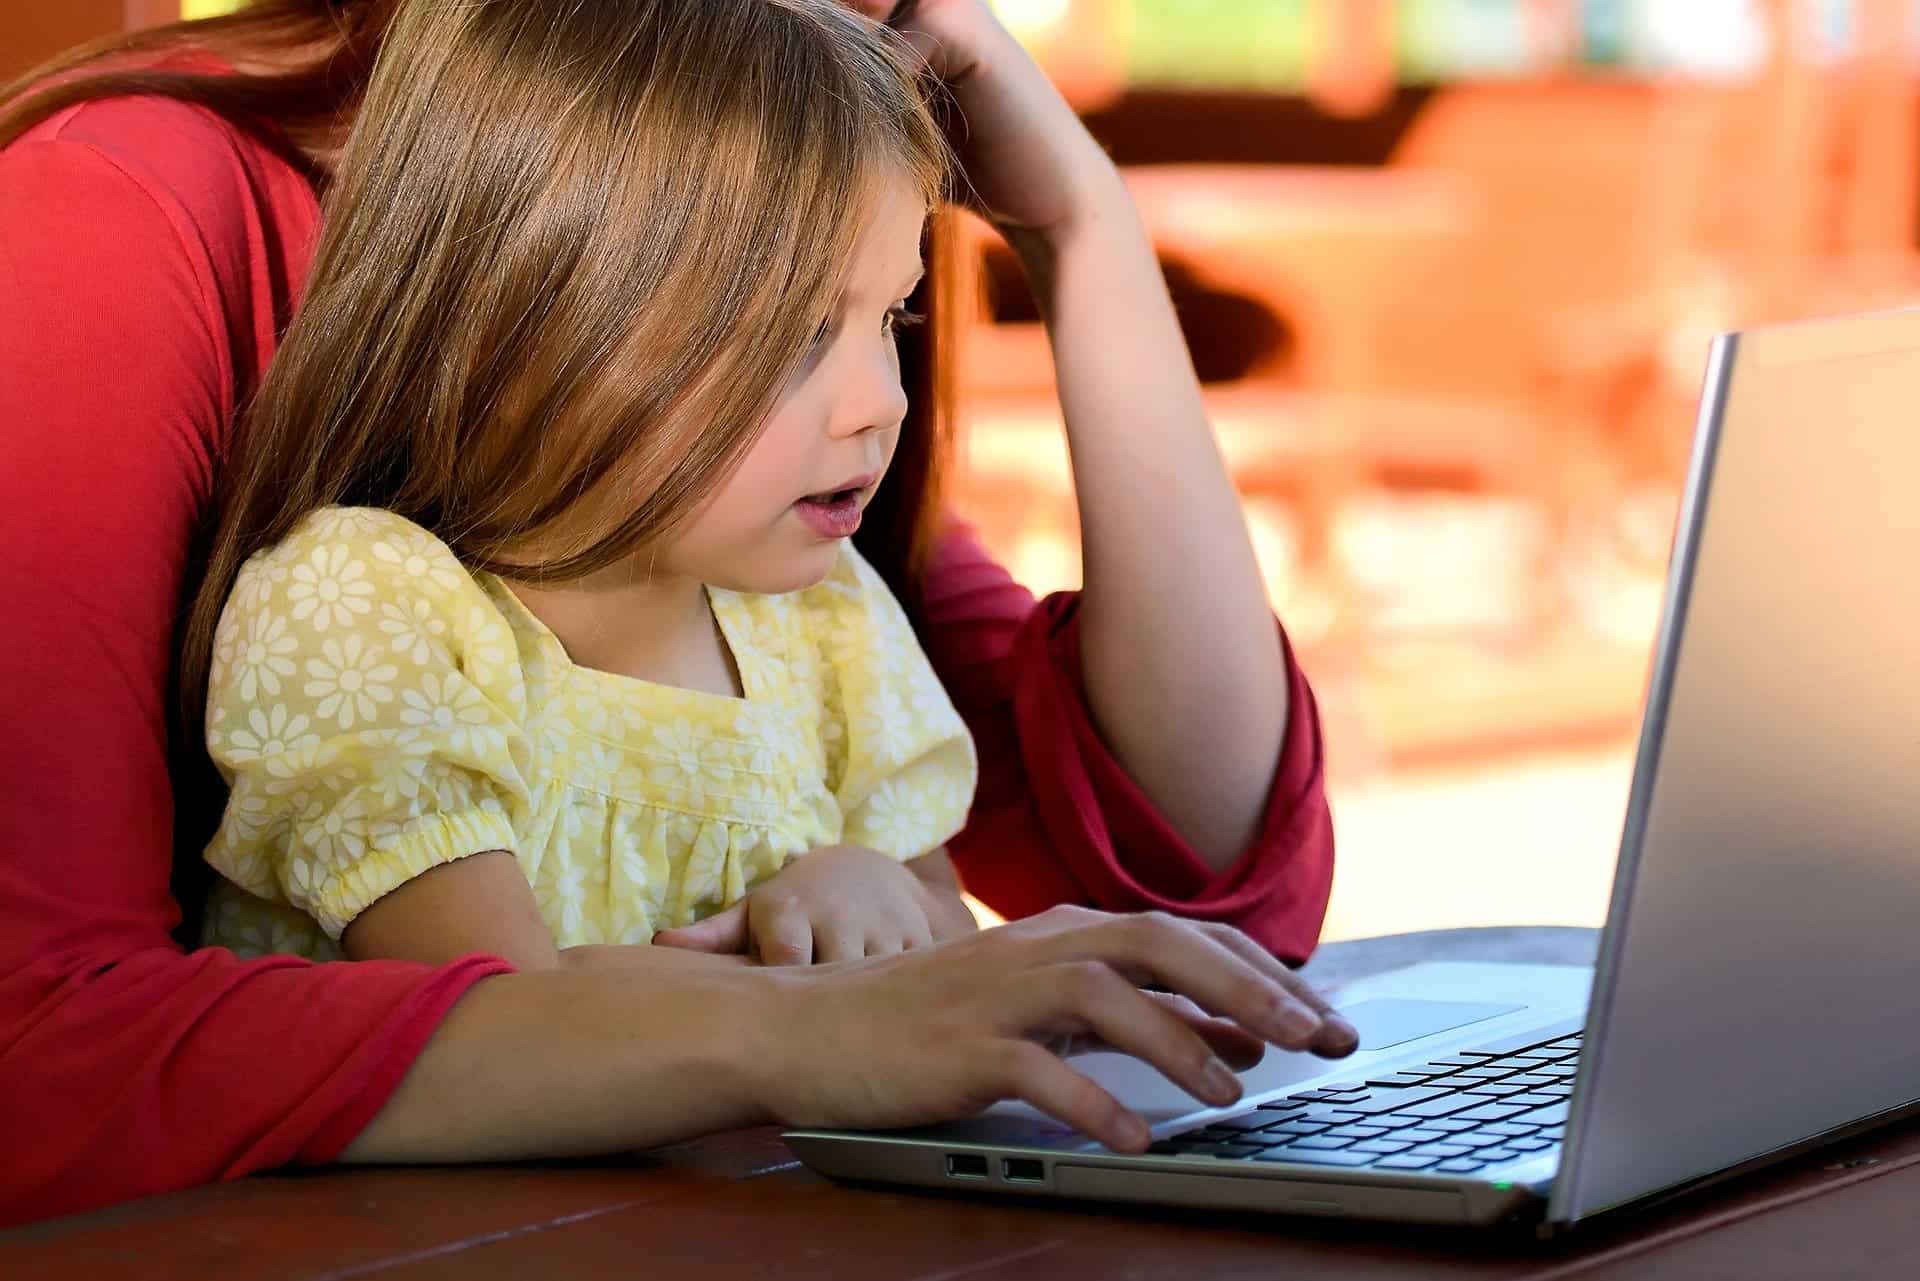 Young girl, about 6 years old, sits on a woman's lap in front of a laptop